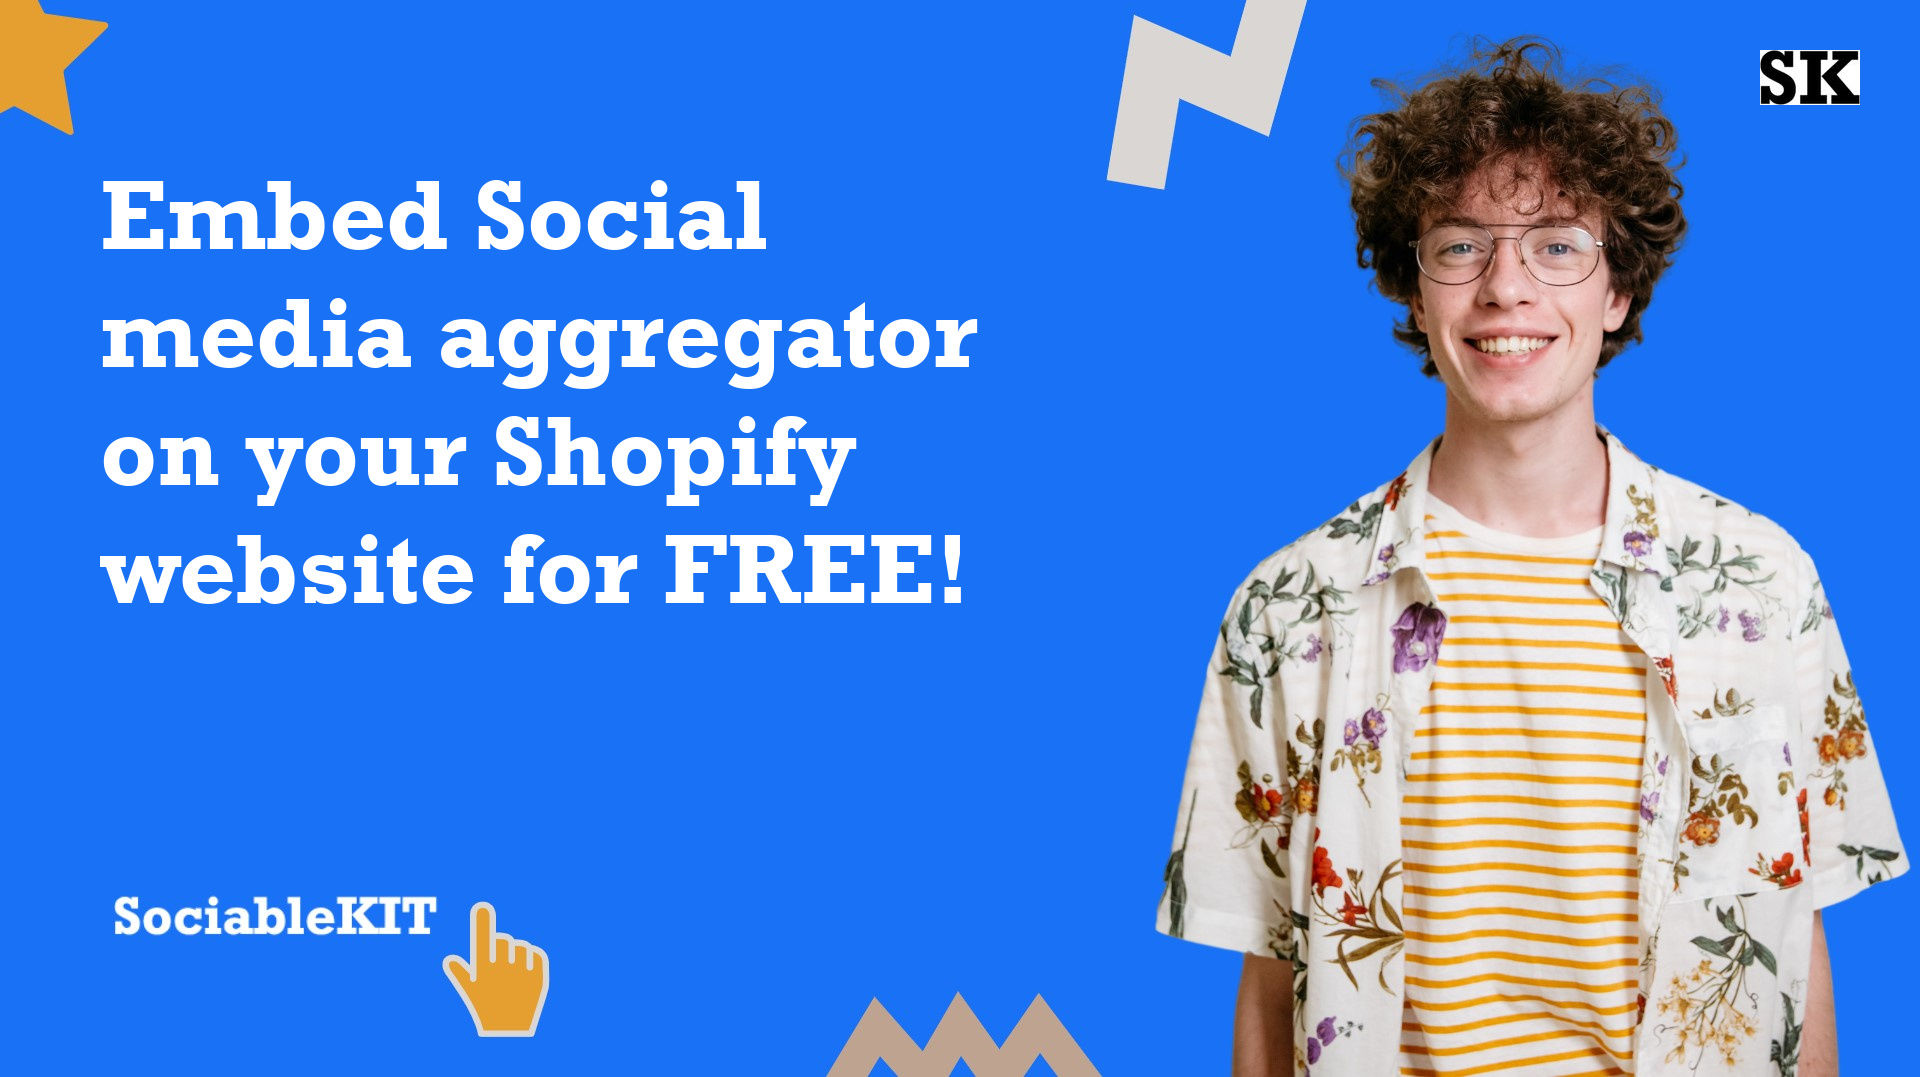 How to embed Social media aggregator on your Shopify website for FREE?